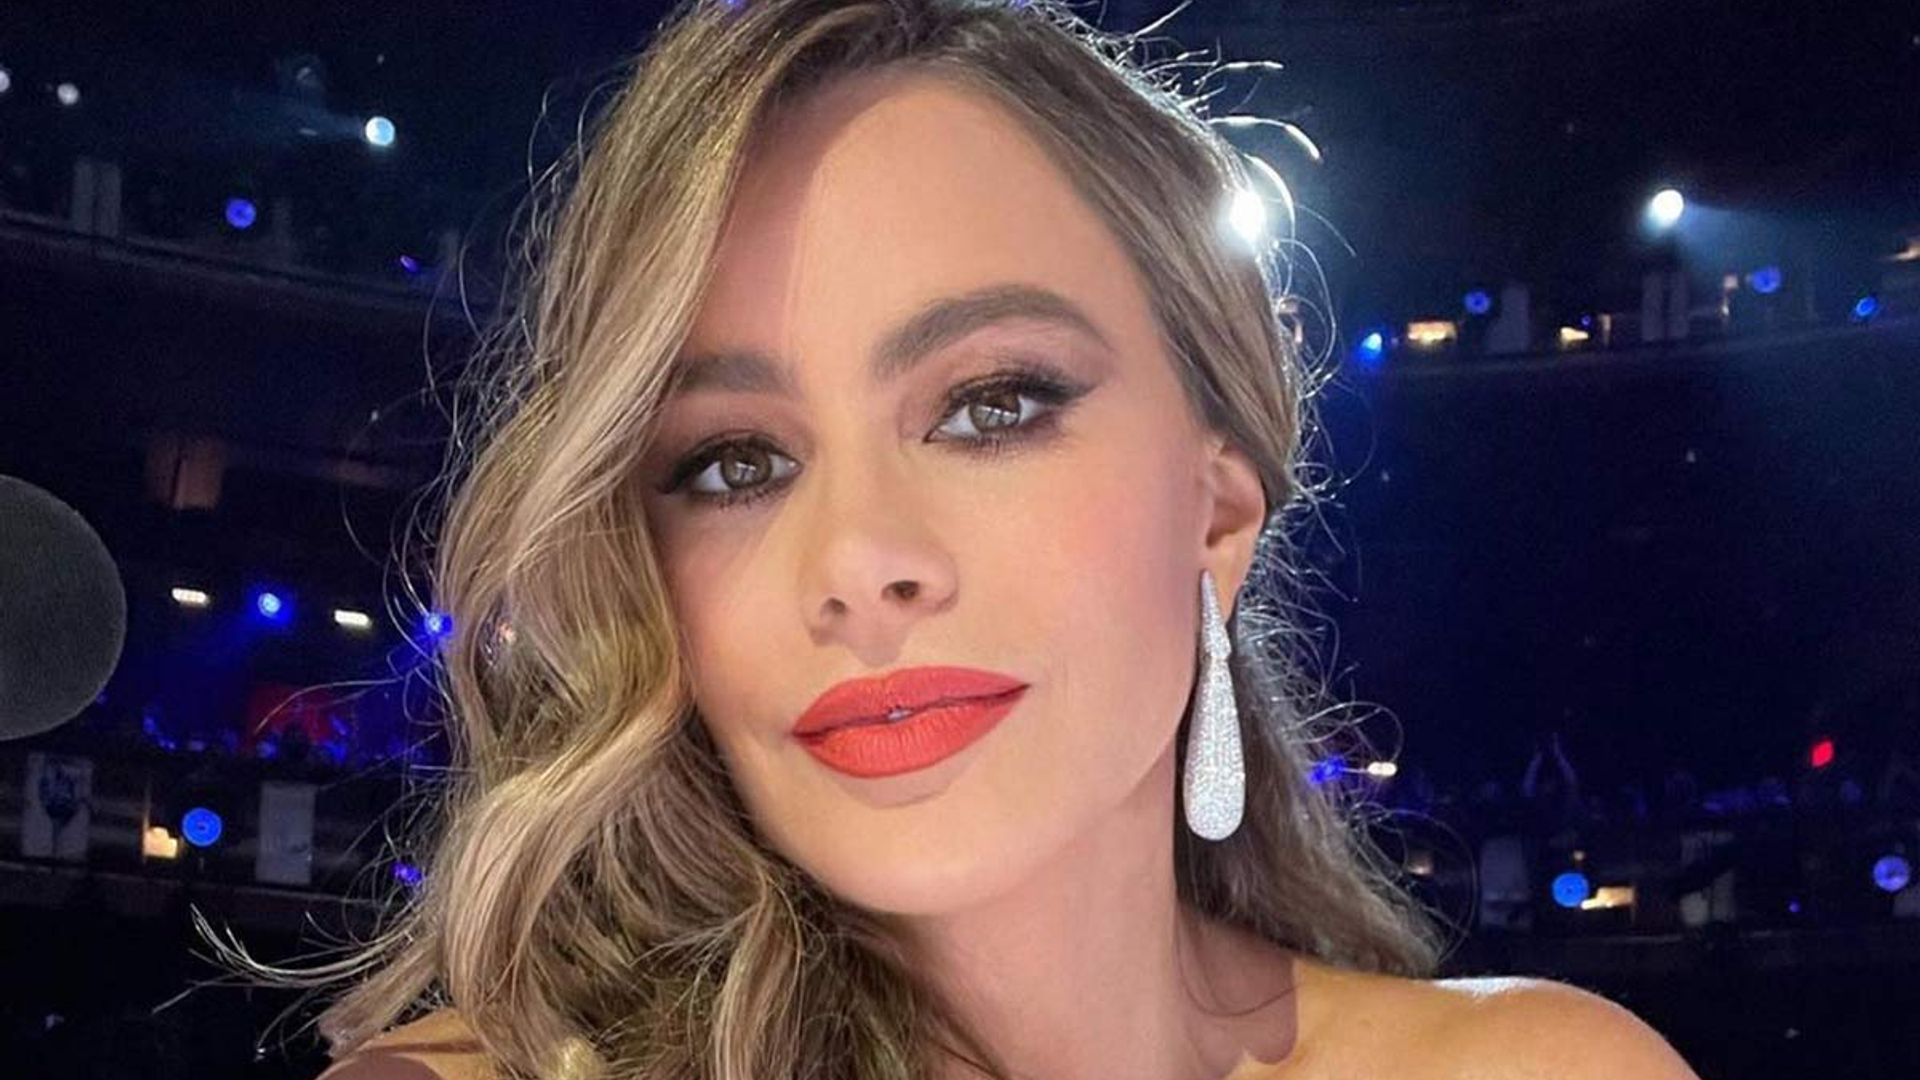 Sofia Vergara floors fans in show-stopping sparkly gown